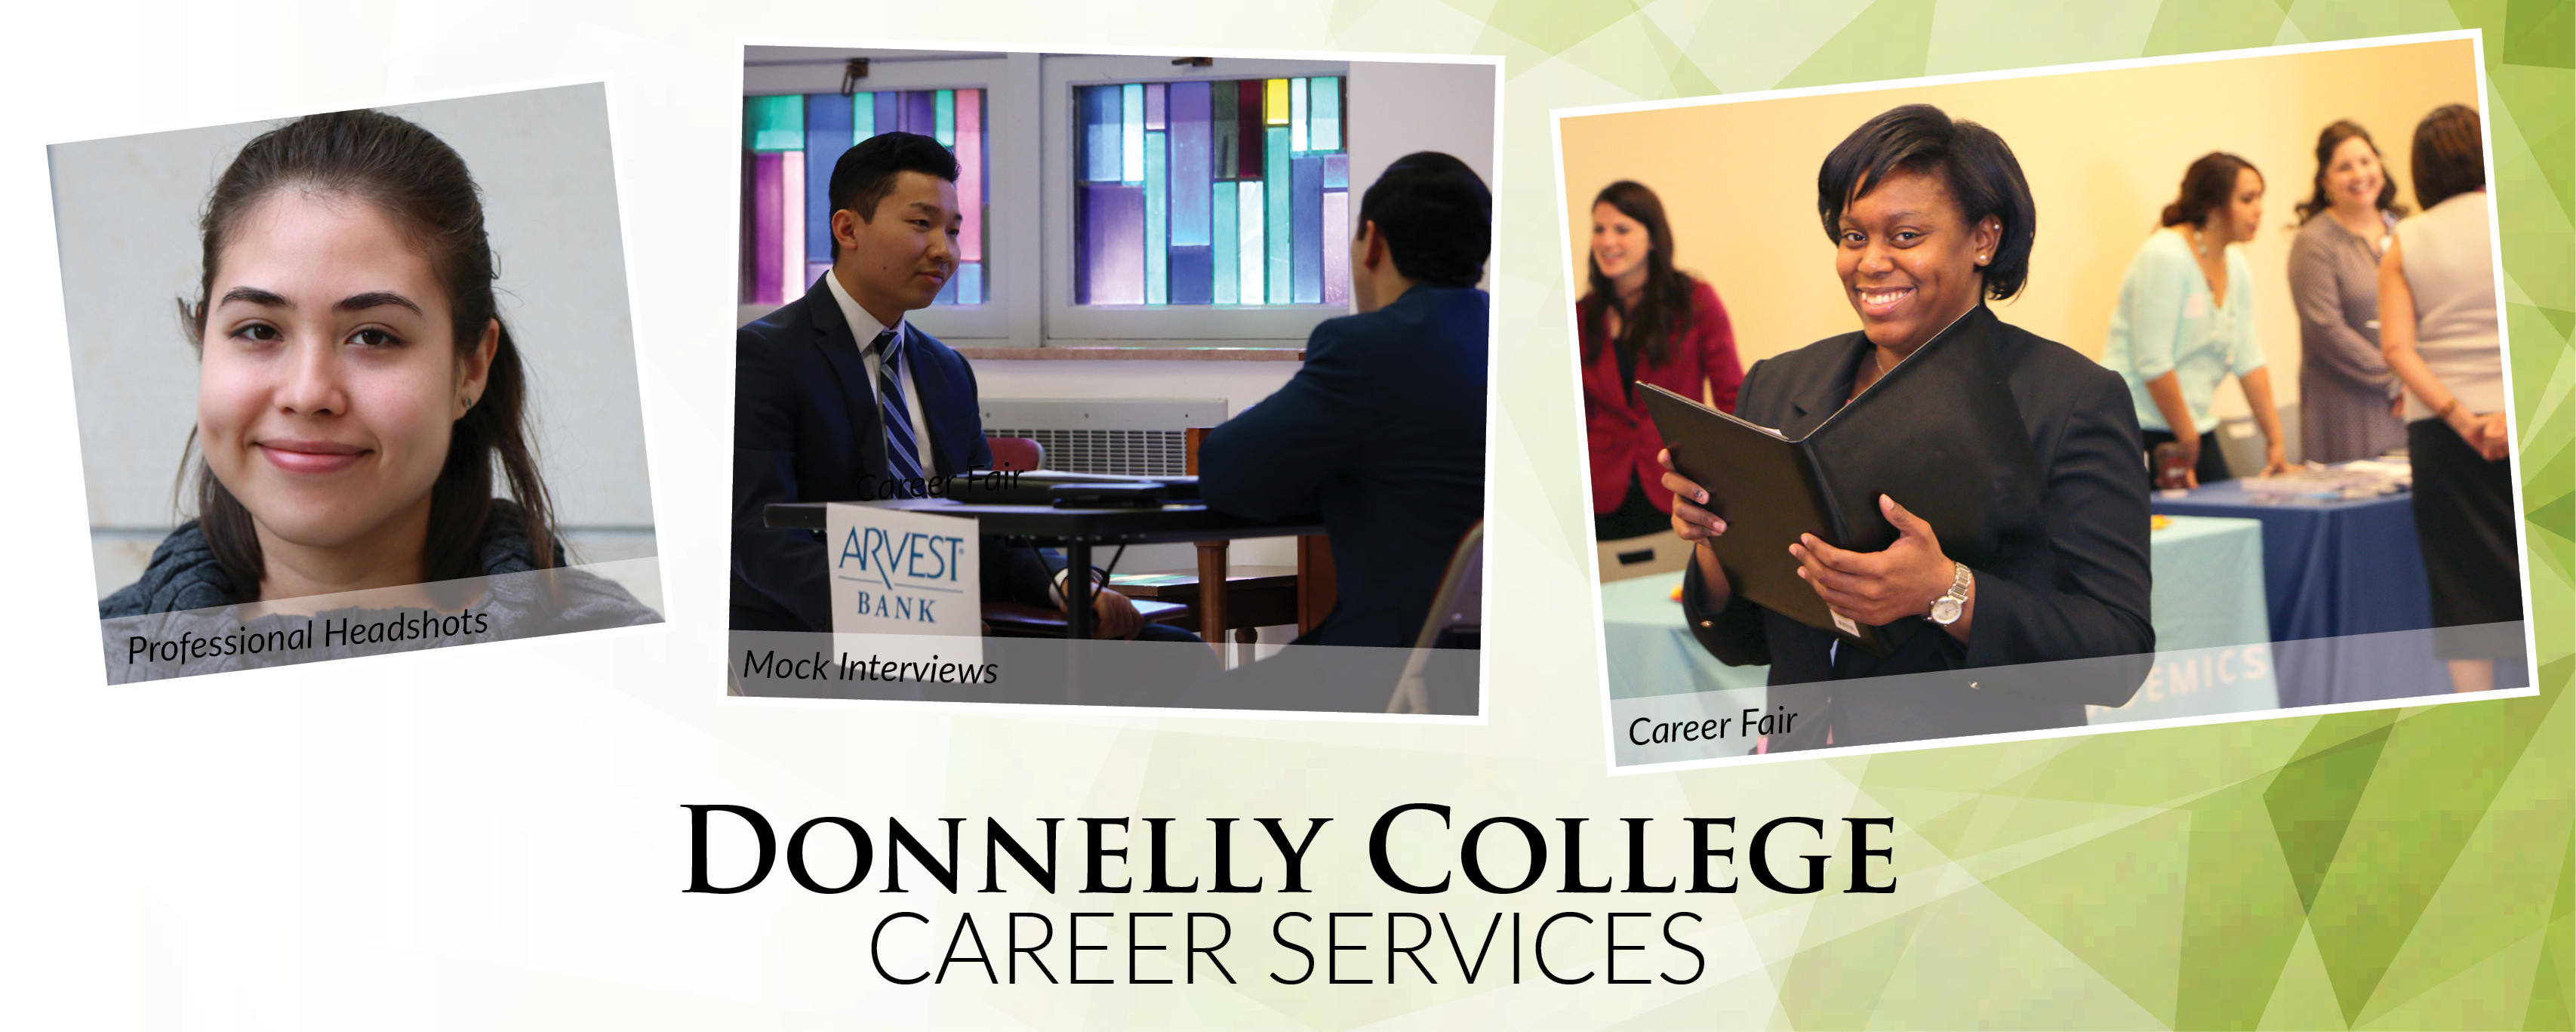 Donnelly College Career Services